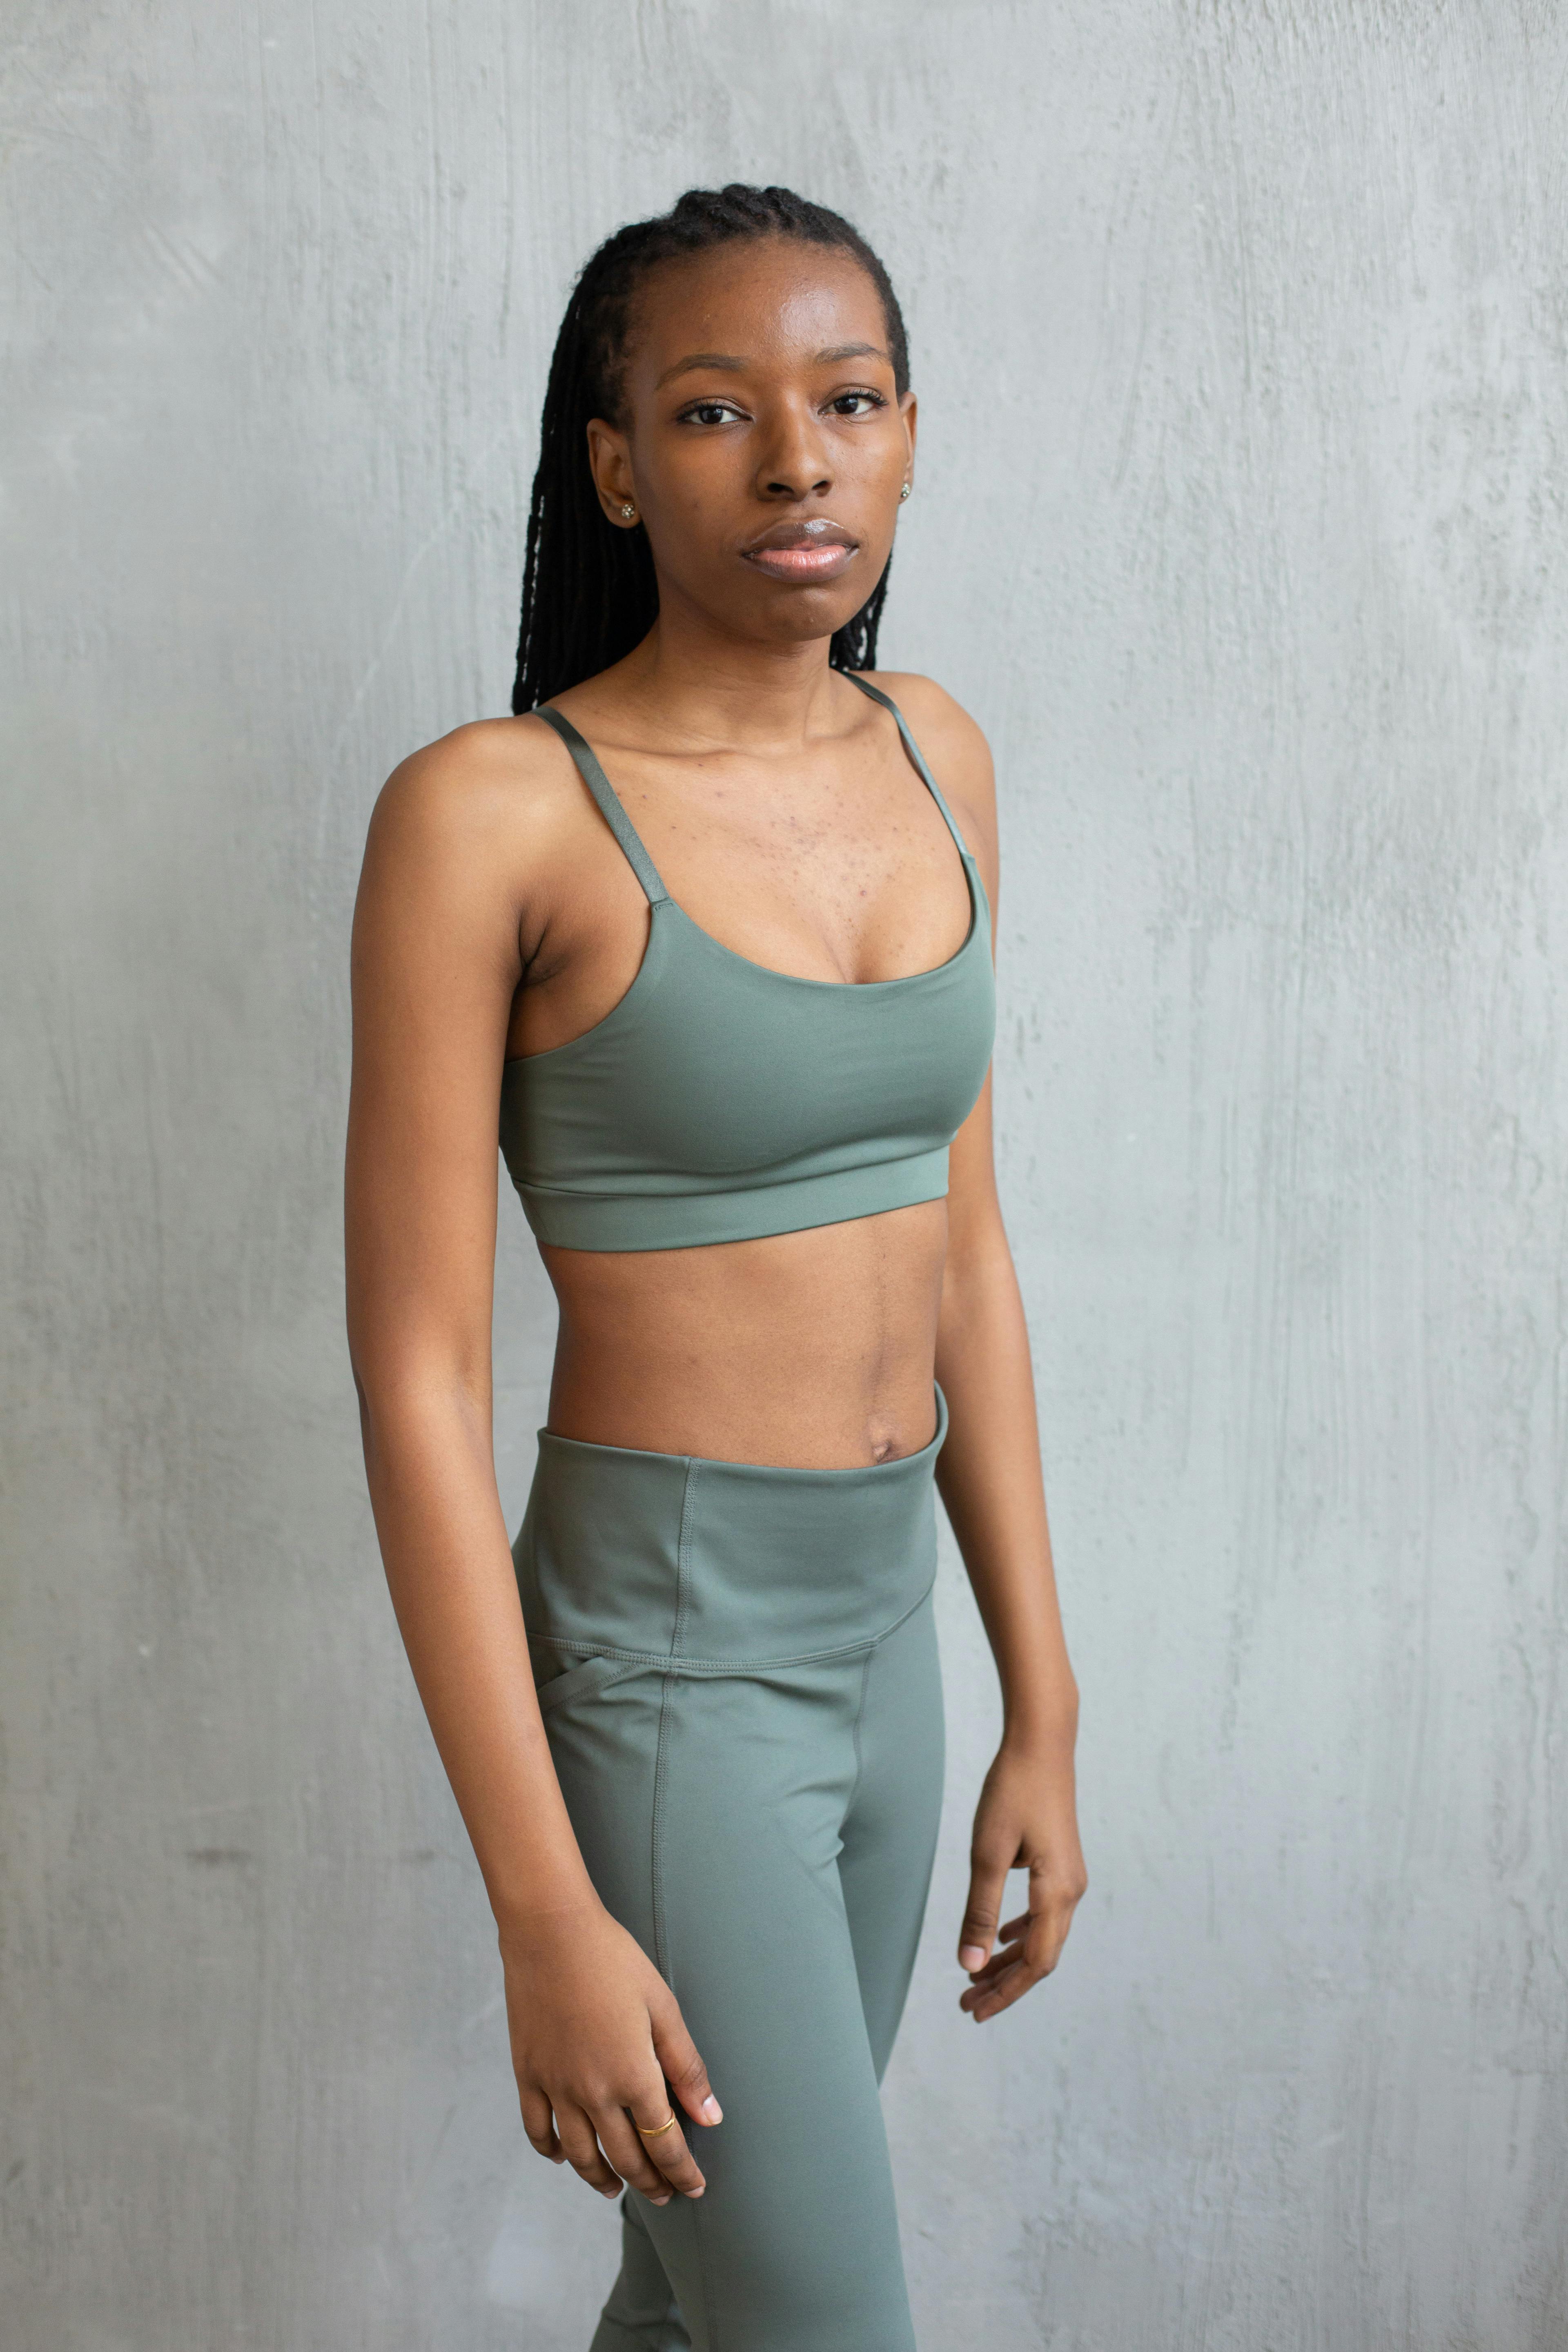 Woman in Sports Bra Standing with Hands on Waist · Free Stock Photo